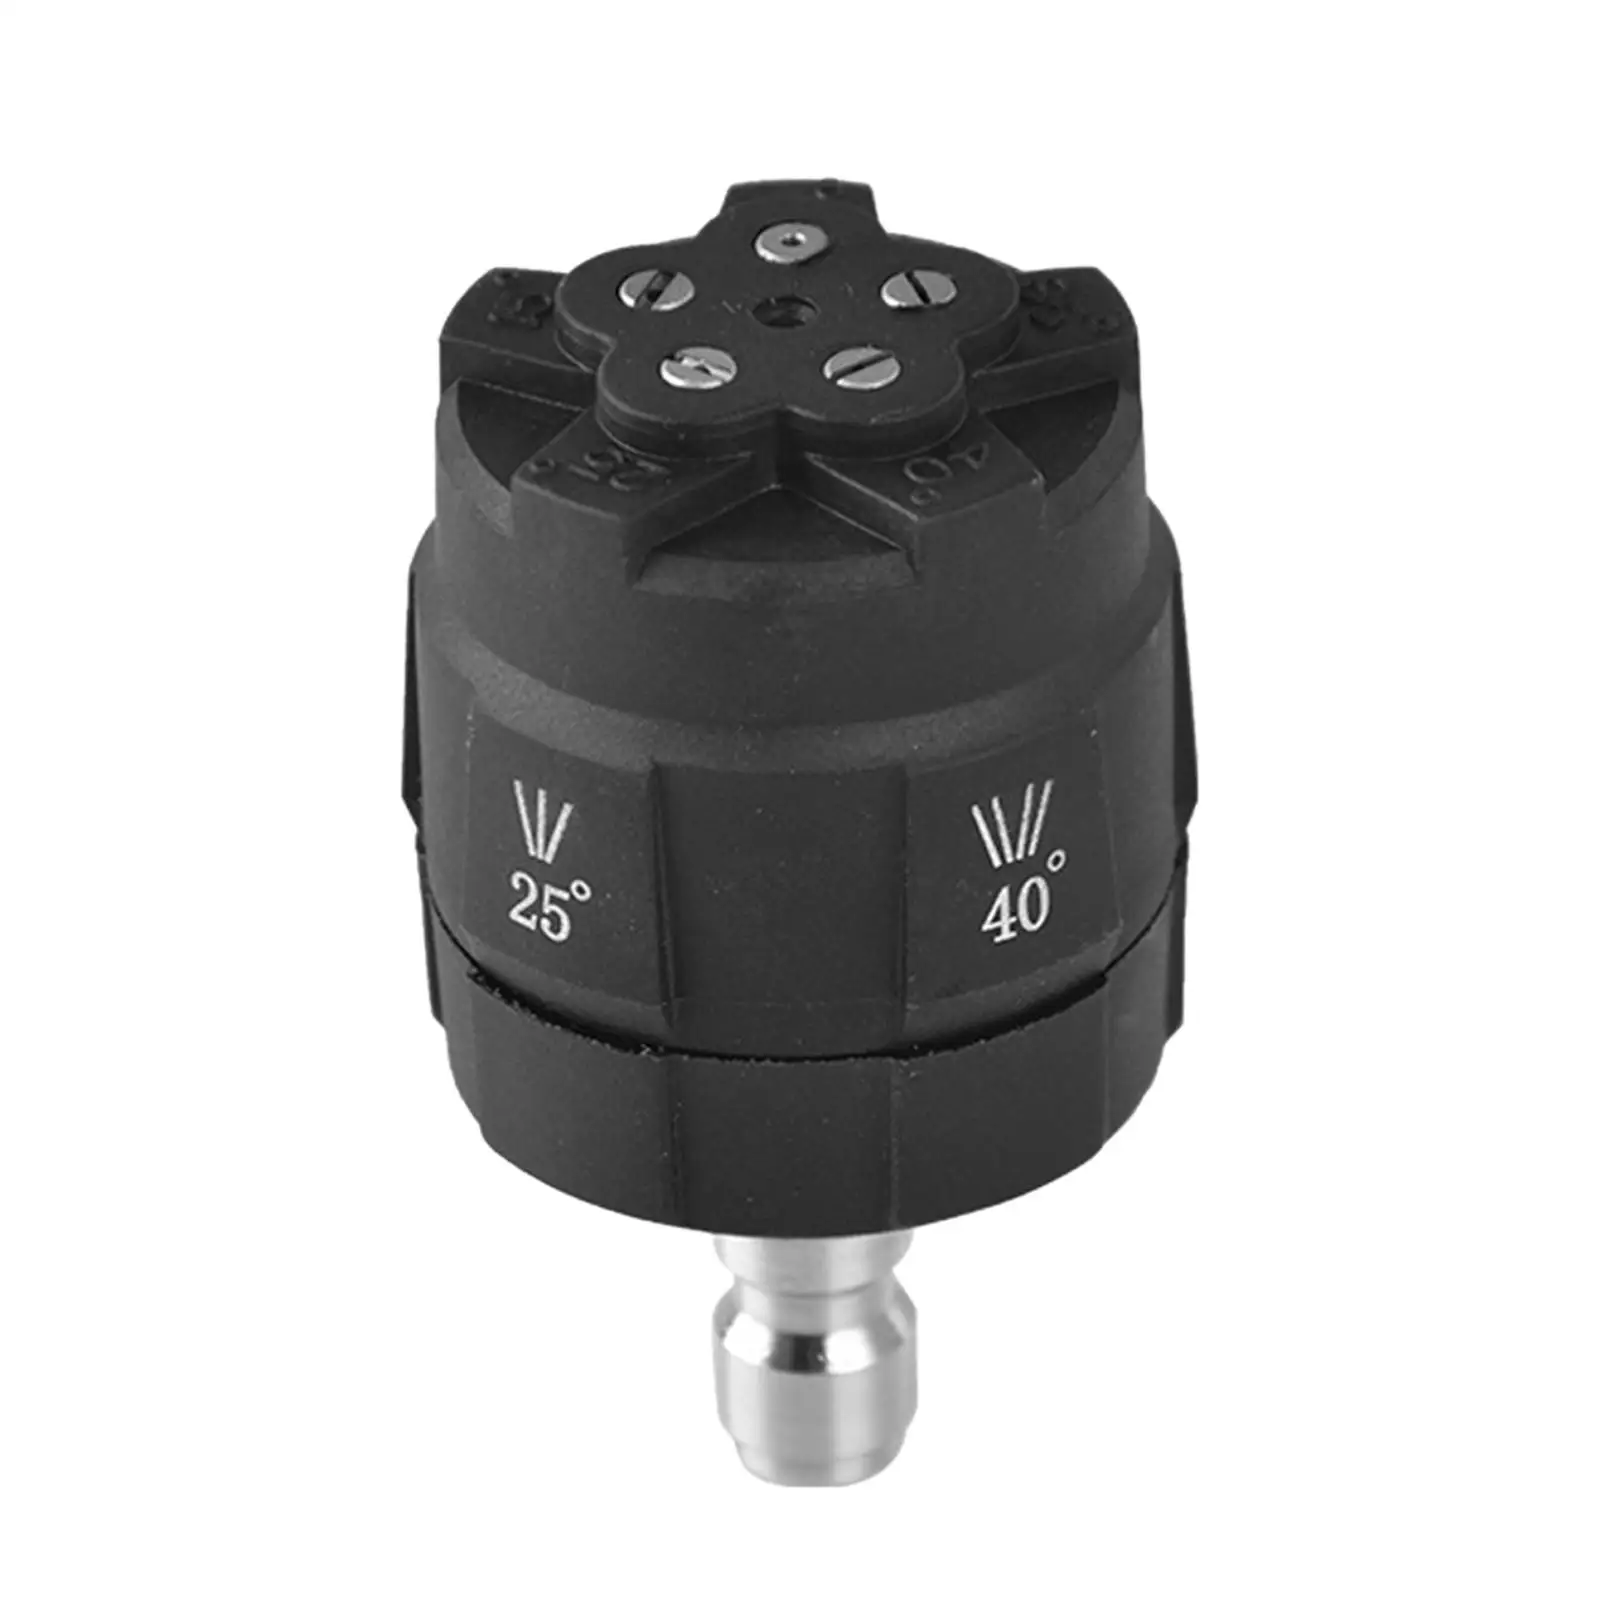 1/4 Pressure Washer Nozzle Quick connect Adaptor Household for Replace Accessories